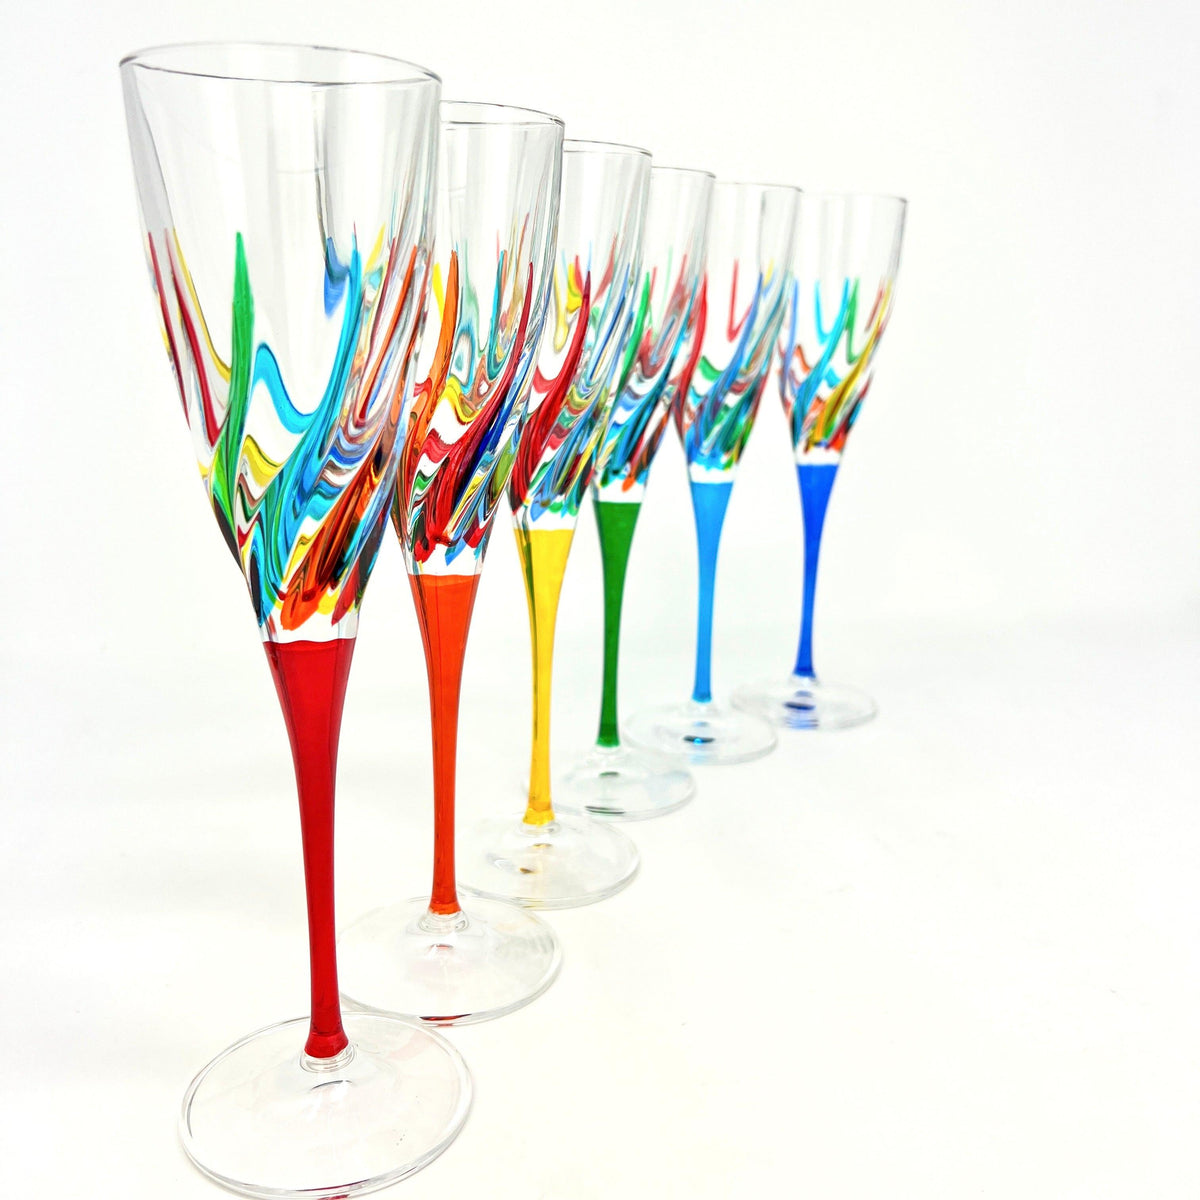 Trix Champagne Flutes, Hand-Painted Italian Crystal, Made in Italy at MyItalianDecor